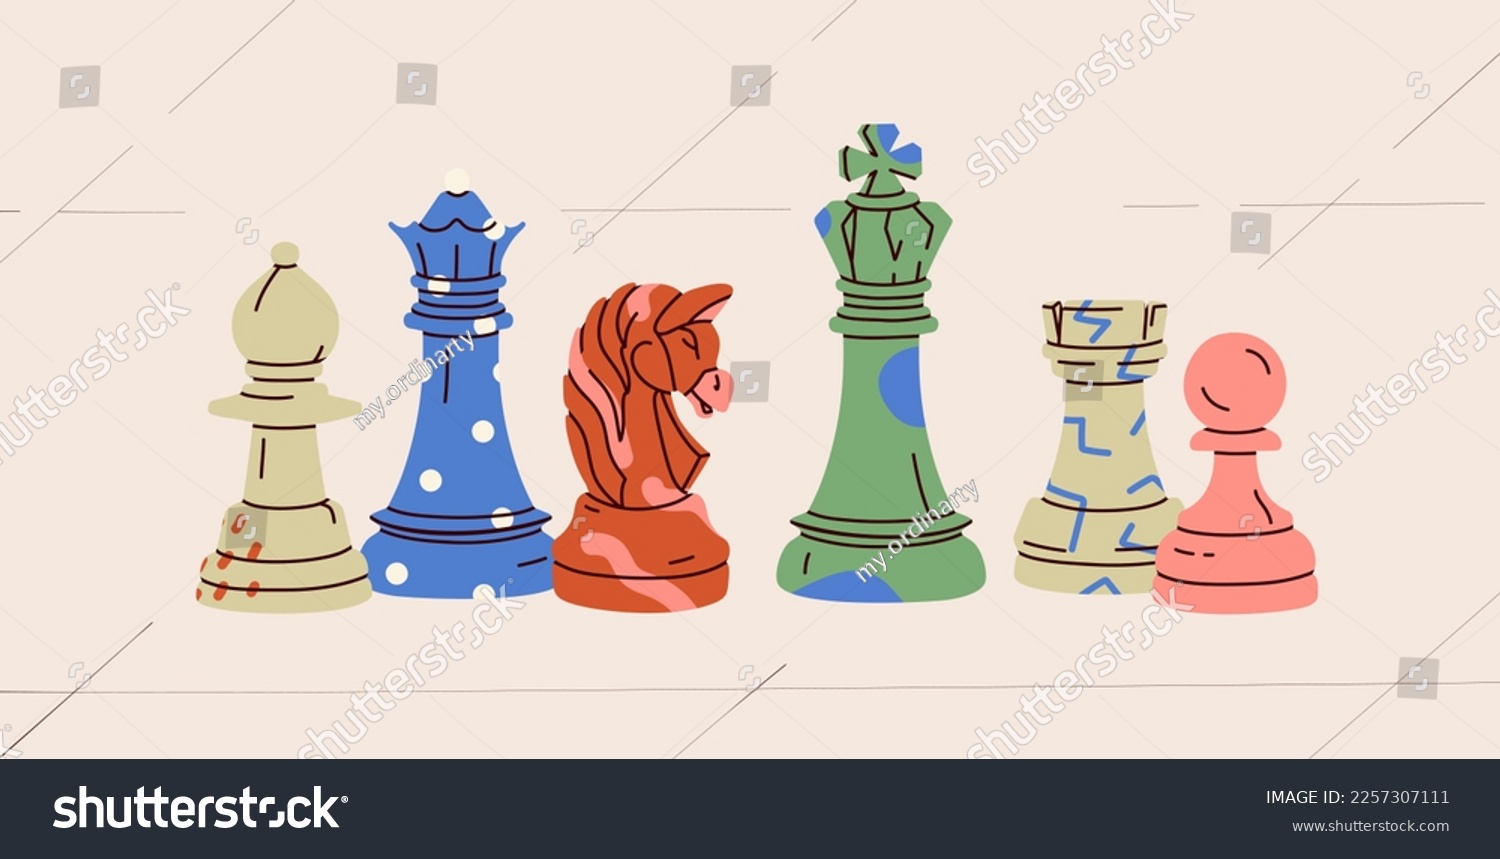 SVG of Chess in crazy vibrant colors. Trendy board game for teenagers. Intelligence development concept. King, queen, bishop, pawn, knight, rook figures with colored patterns. All items are isolated svg